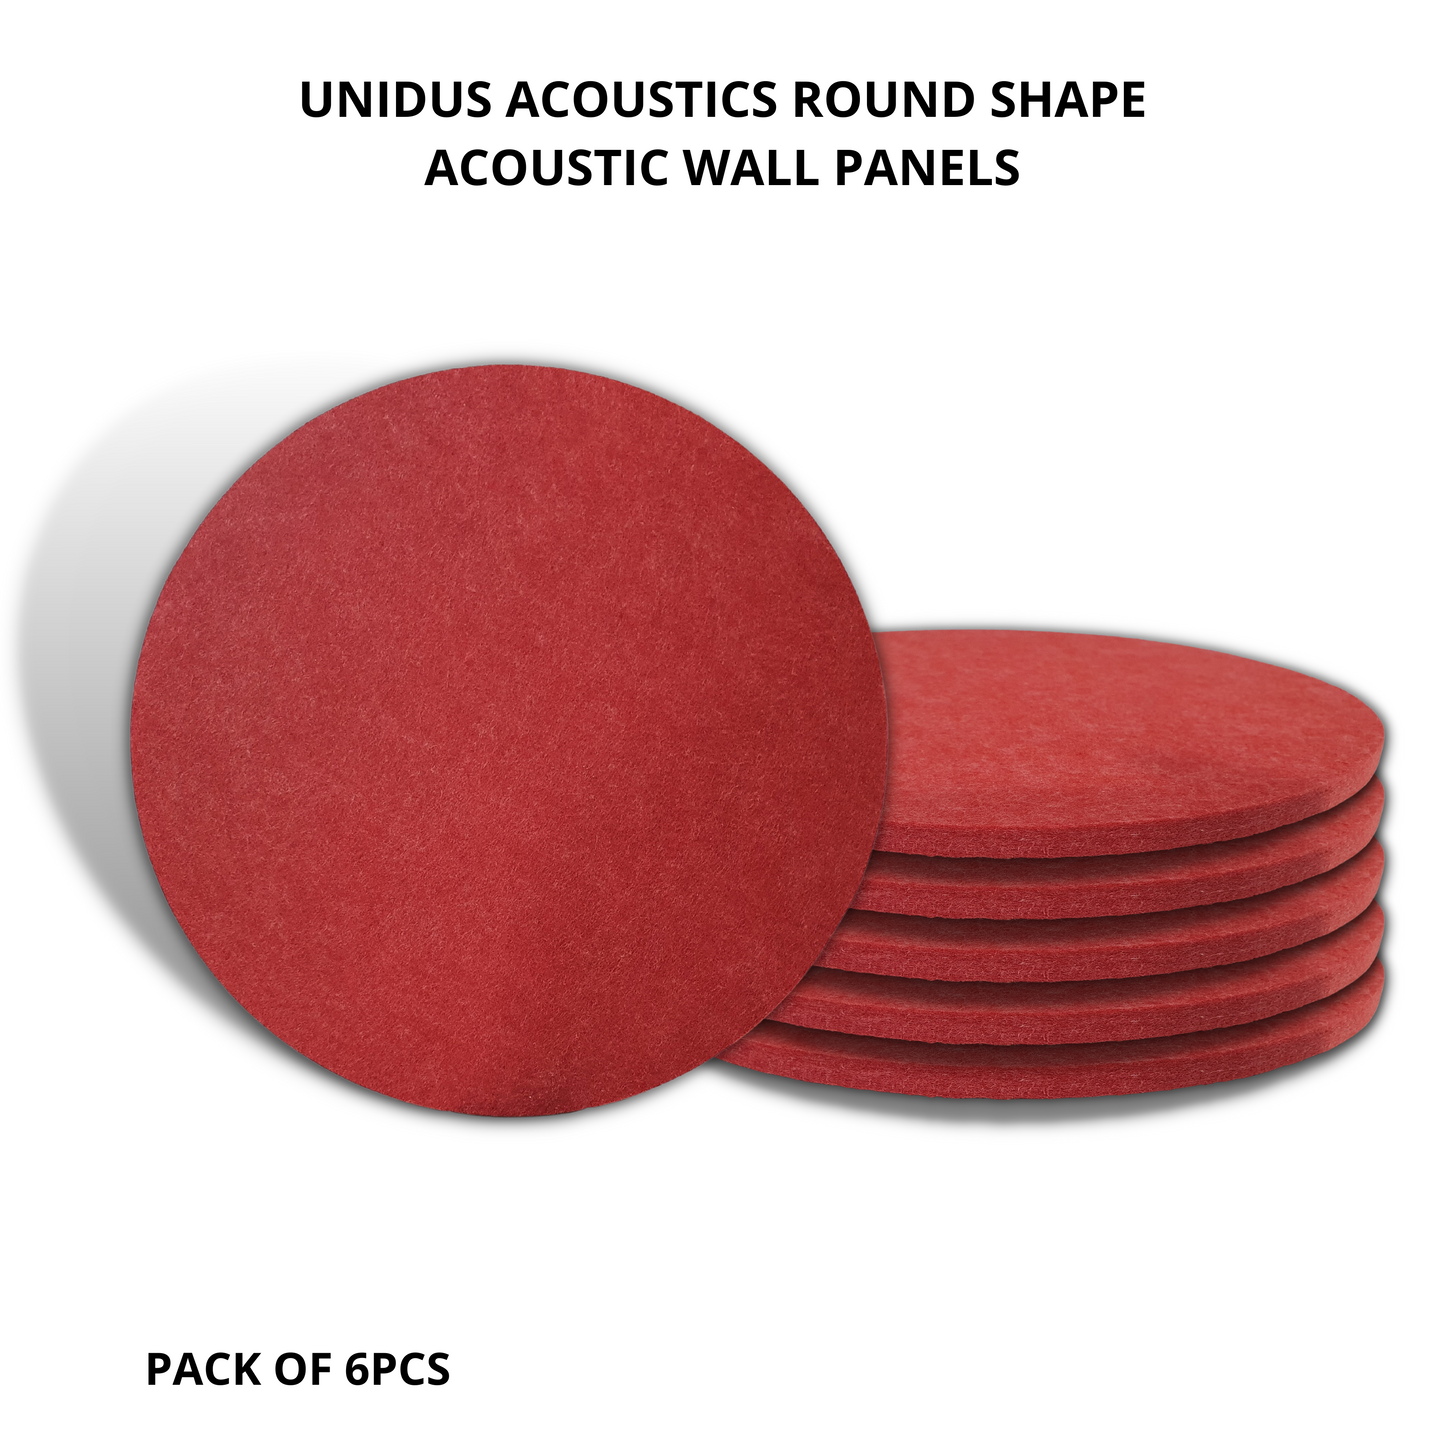 Round Acoustic Wall Panels Set of 6, 12"x12"x 9mm, Chilly Red